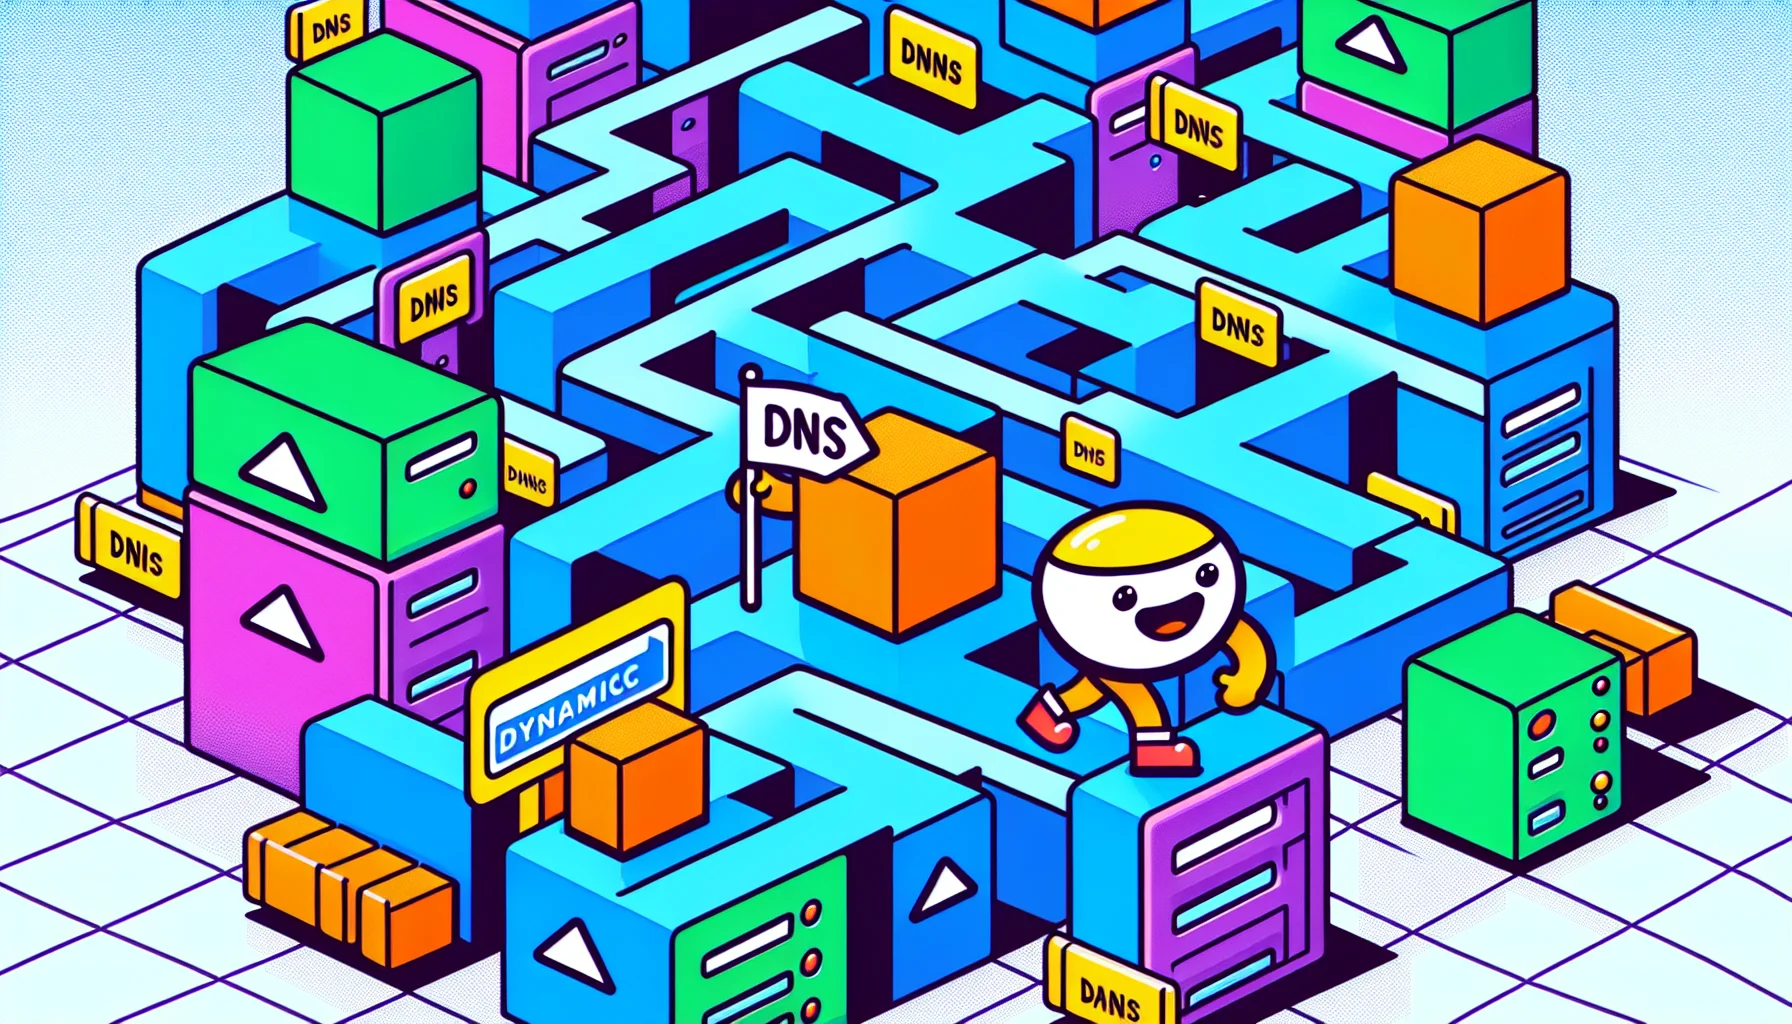 Create a humorous and enticing image involving web hosting. Picture a host of colourful computer servers, each marked with iconic square symbols, in a maze-like data center. A cartoon character, an internet browser symbol with cheerful eyes and a grin, is navigating through the maze, carrying a flag labelled 'Dynamic DNS'. The scenario is playful and satisfying, similar to a video game, capturing the dynamic and ever-evolving nature of Squarespace's DNS services.